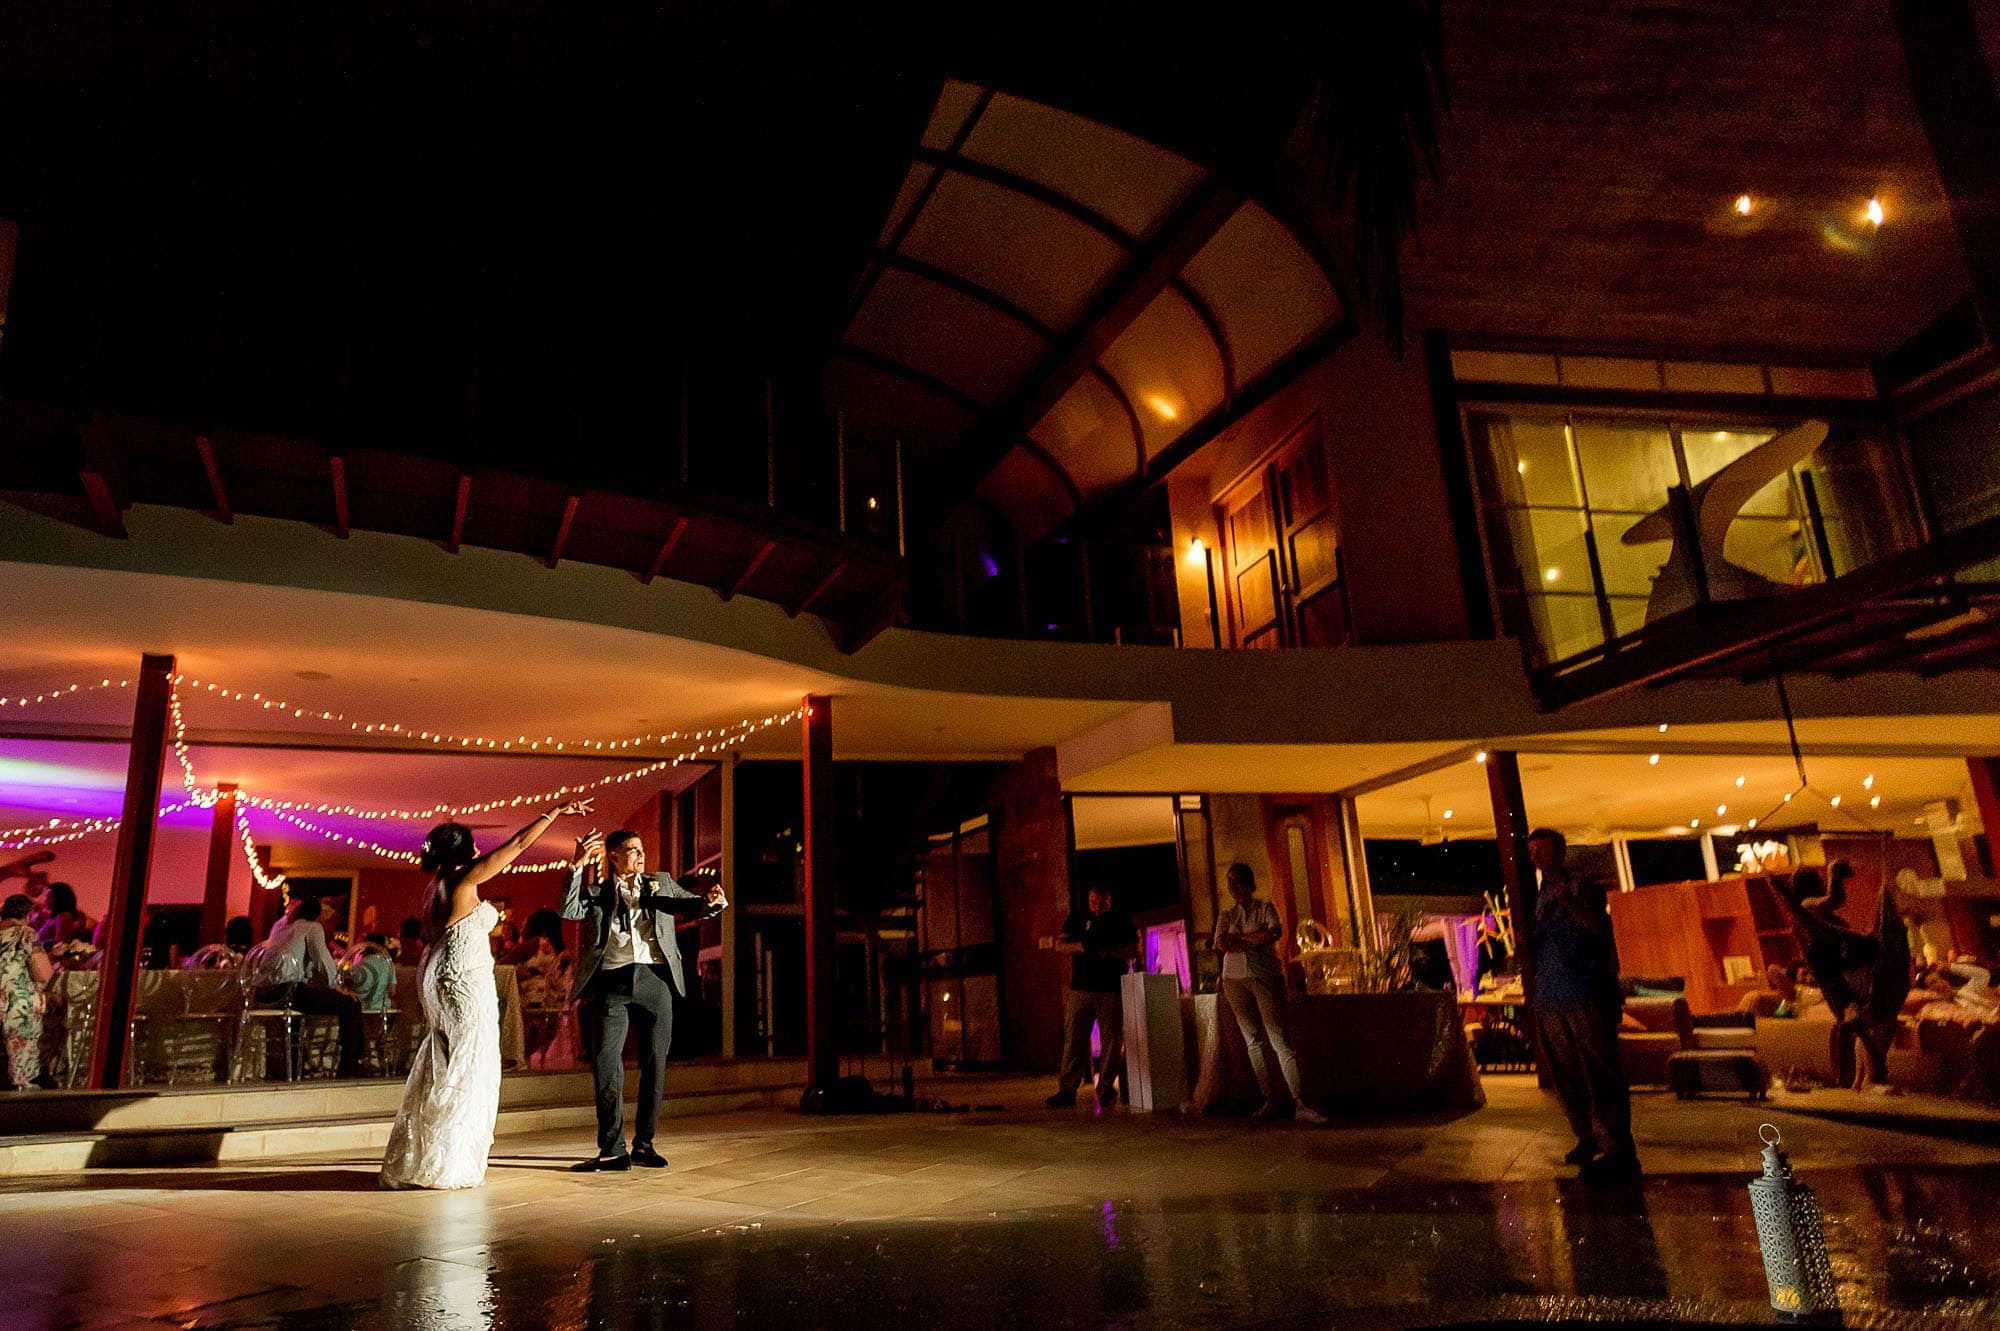 Wedding venue ideas: Check out this epic scene of the bride and groom